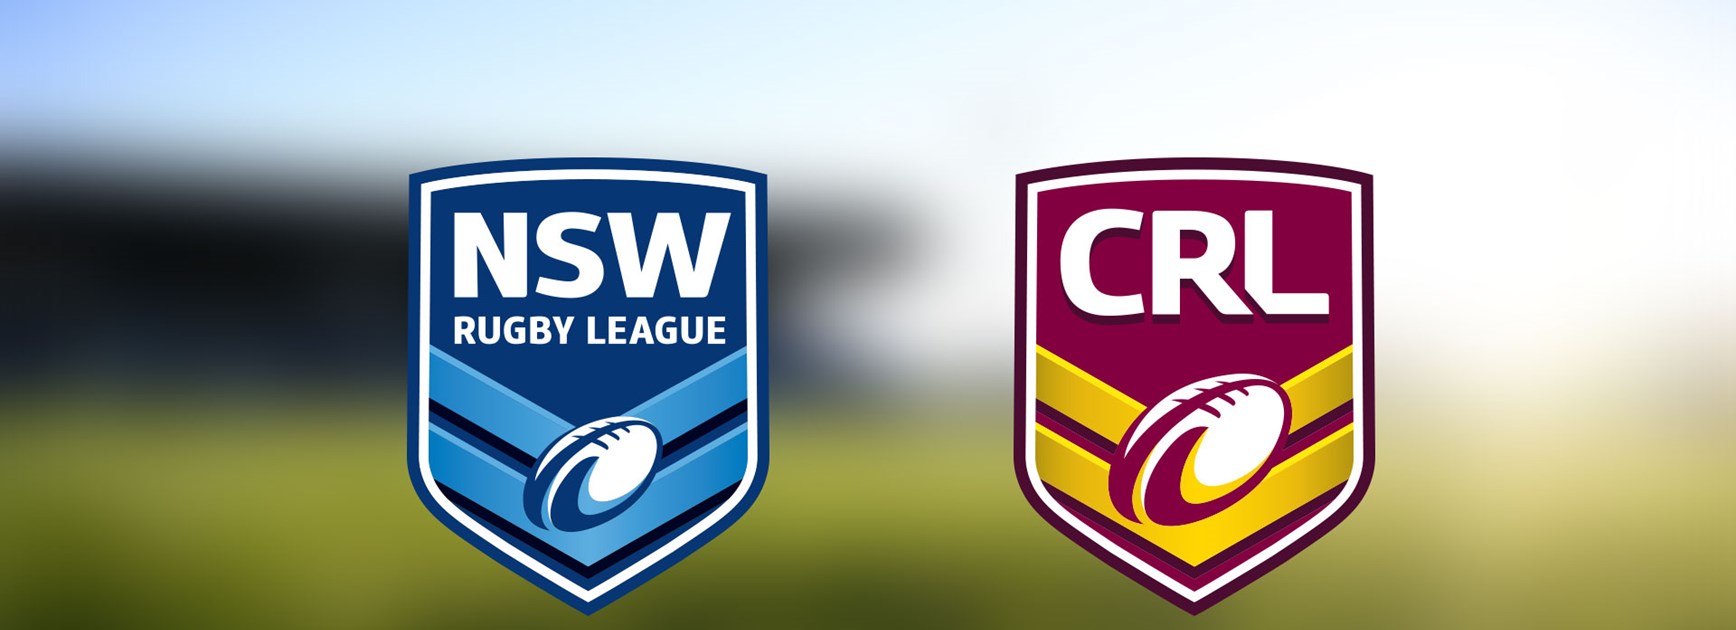 Historic meeting of NSWRL and CRL members